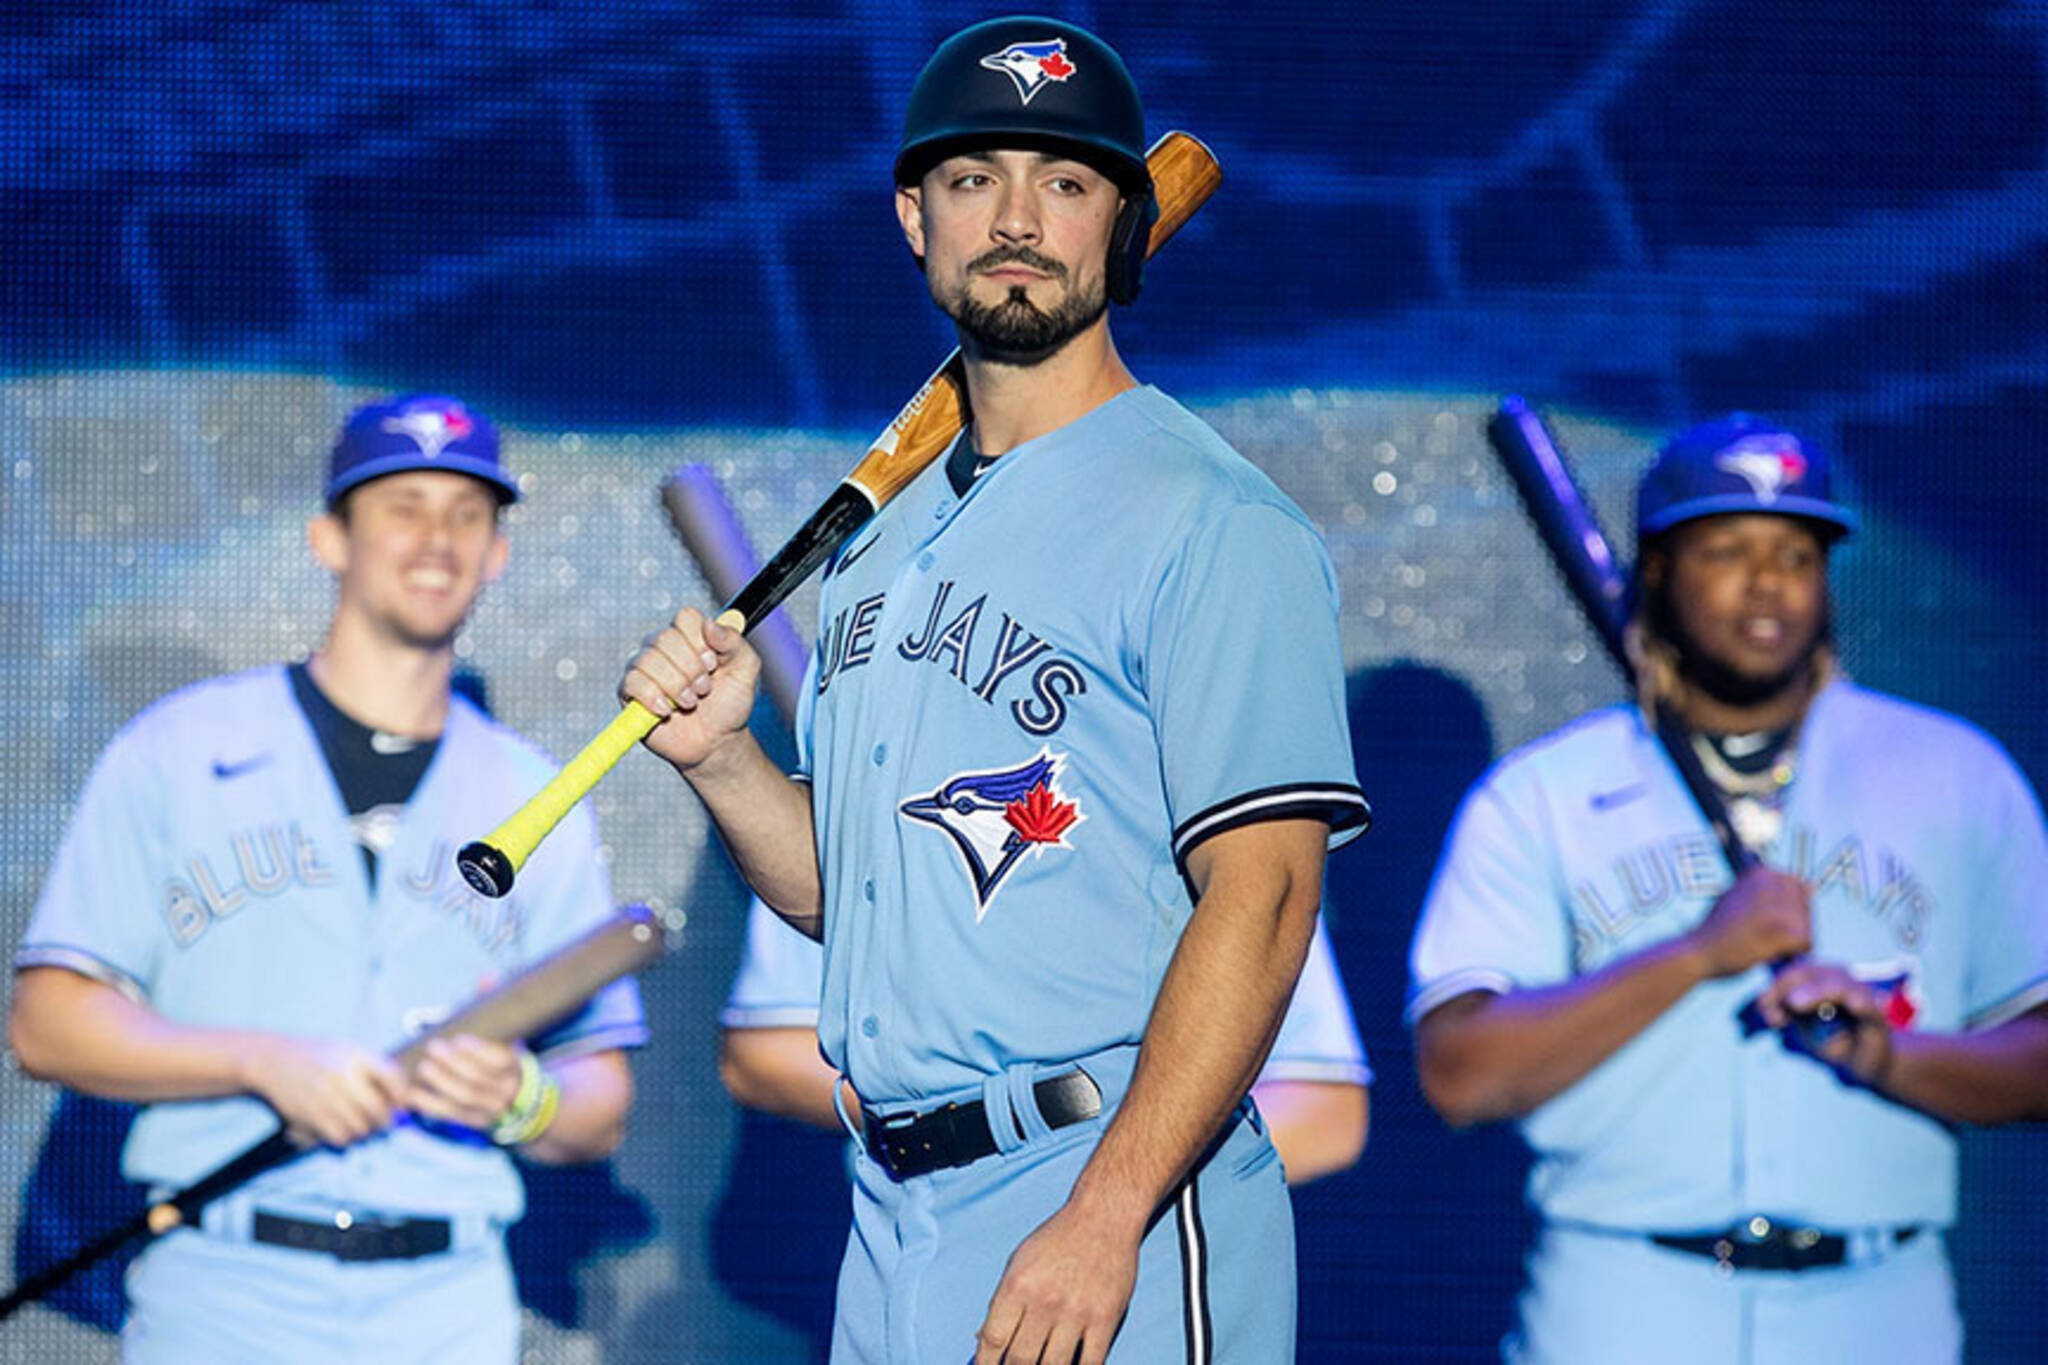 This is what Toronto thinks of the new Blue Jays uniforms